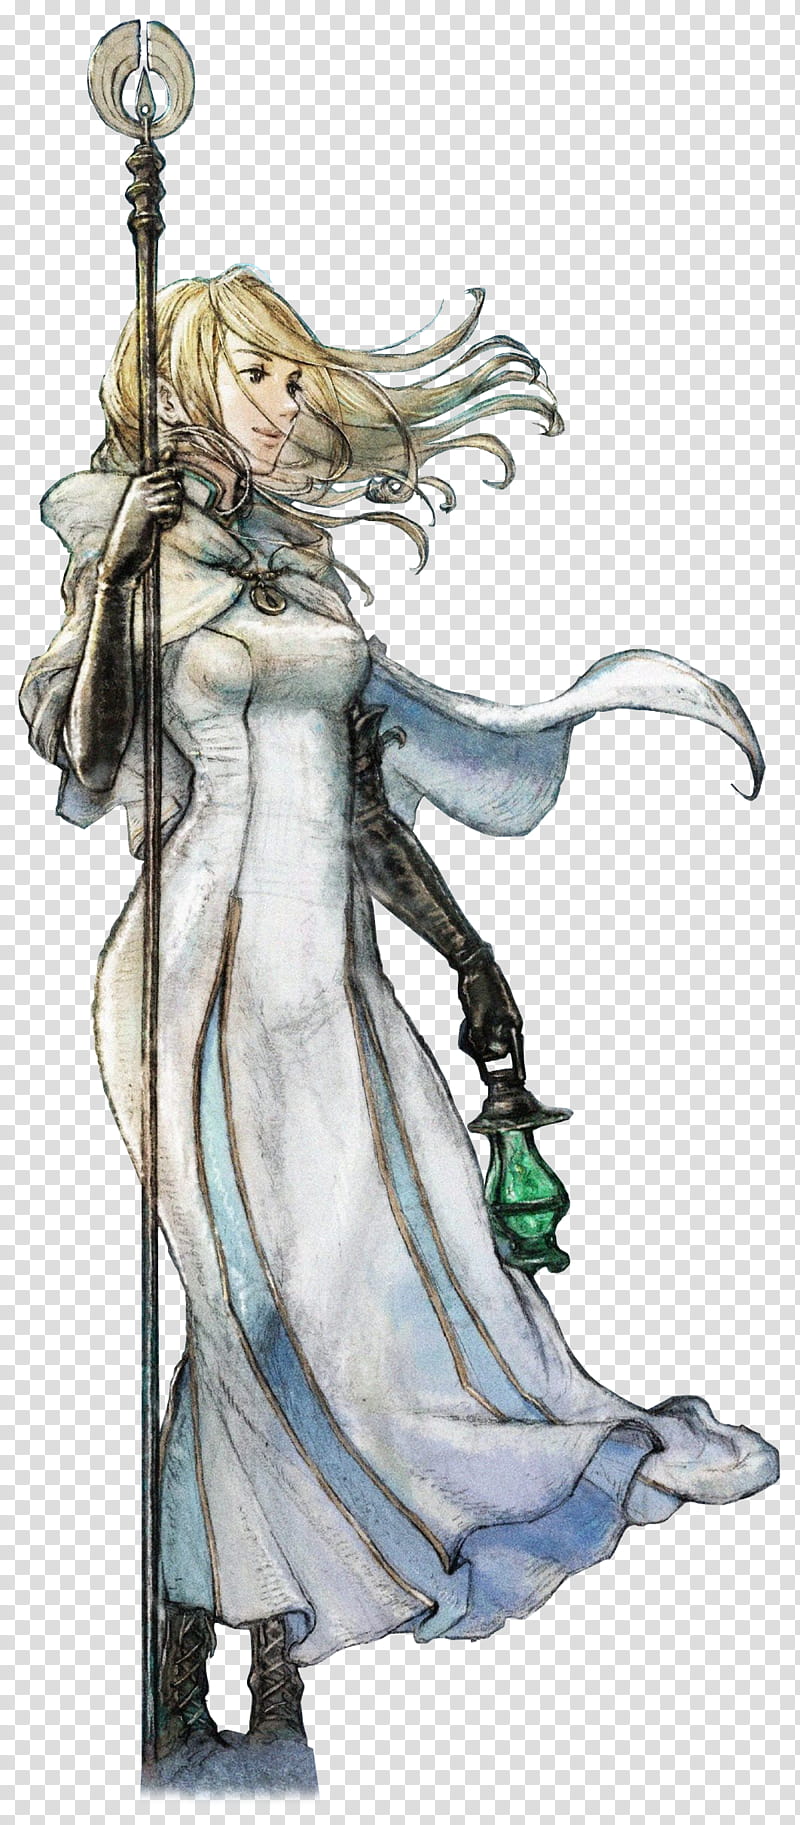 Octopath Traveler Ophilia Render, white dress girl holding staff game character transparent background PNG clipart